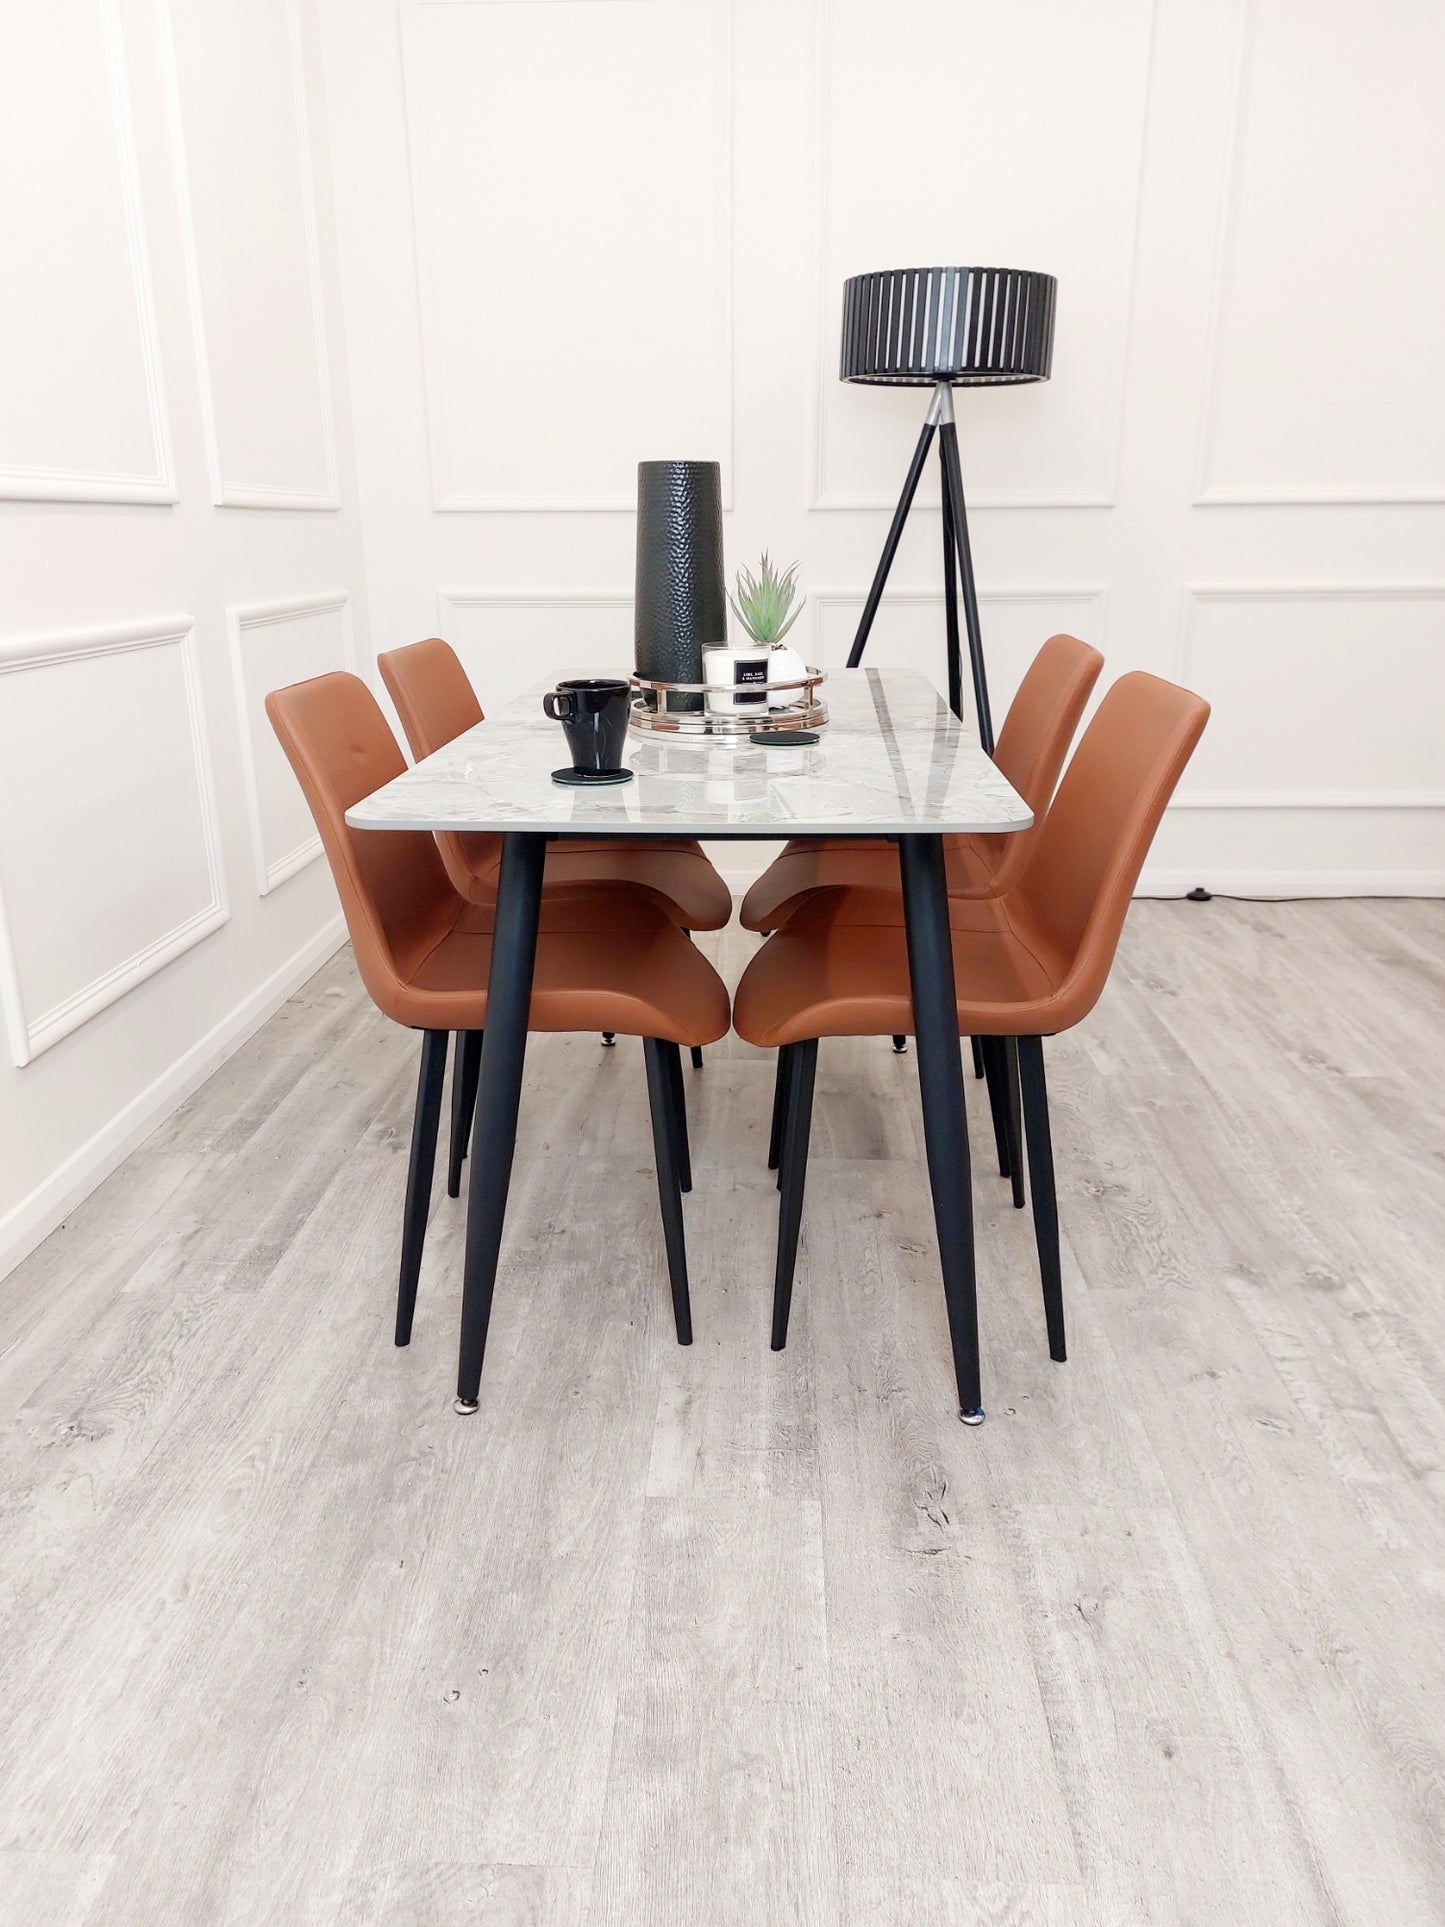 Titus Marble Dining Table With Black Legs 1.4m